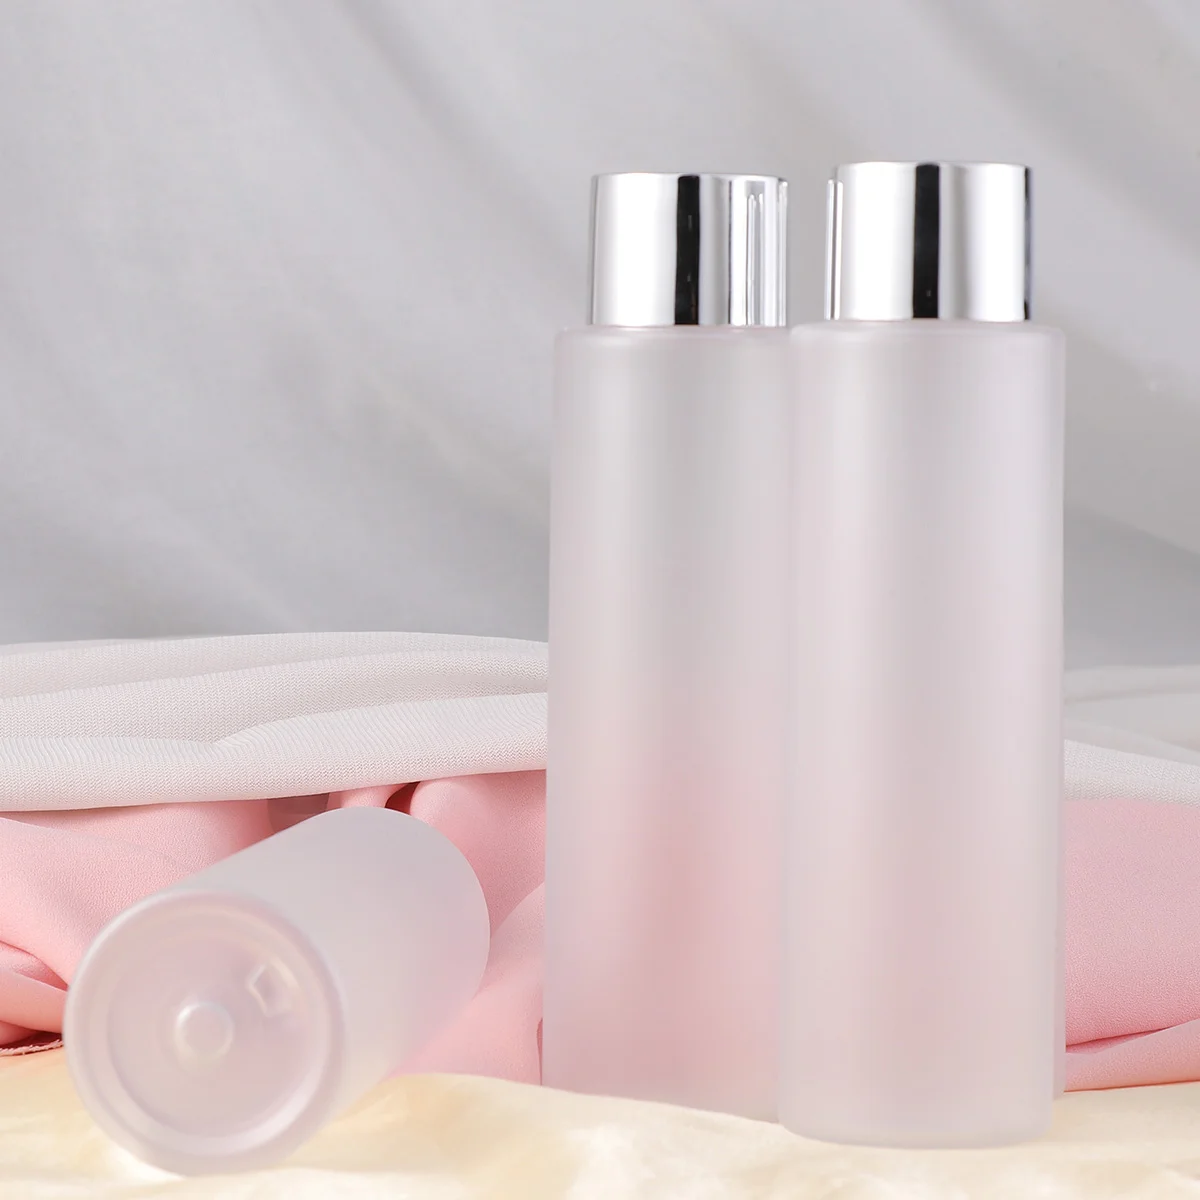 4pcs Refillable Empty Bottle Vial Jar Pot Lotion Shower Shampoo Storage Container With Cap For Home Travel 200ml